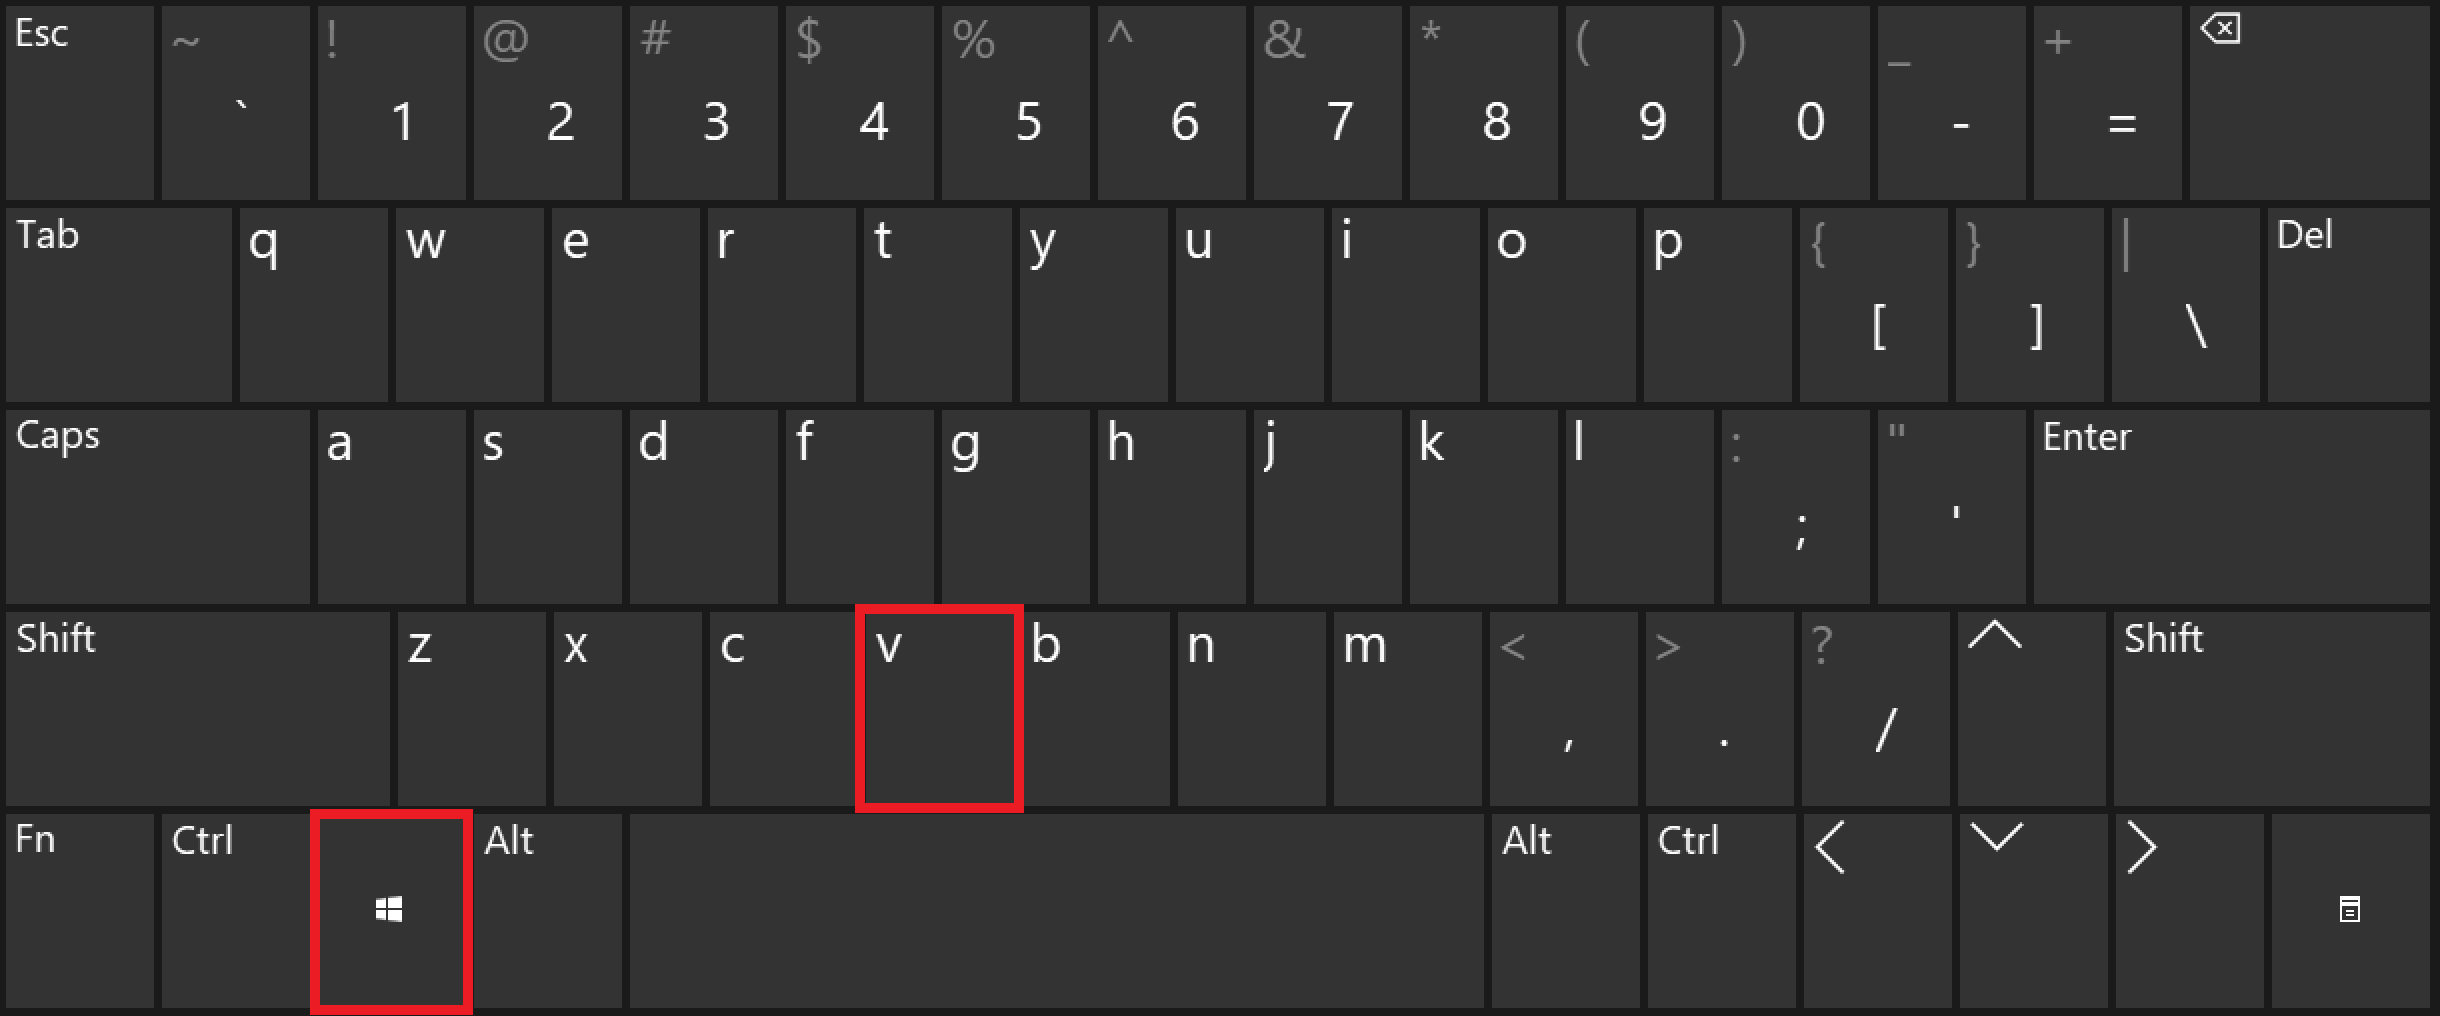 Open the clipboard on the keyboard with the Windows + V shortcut